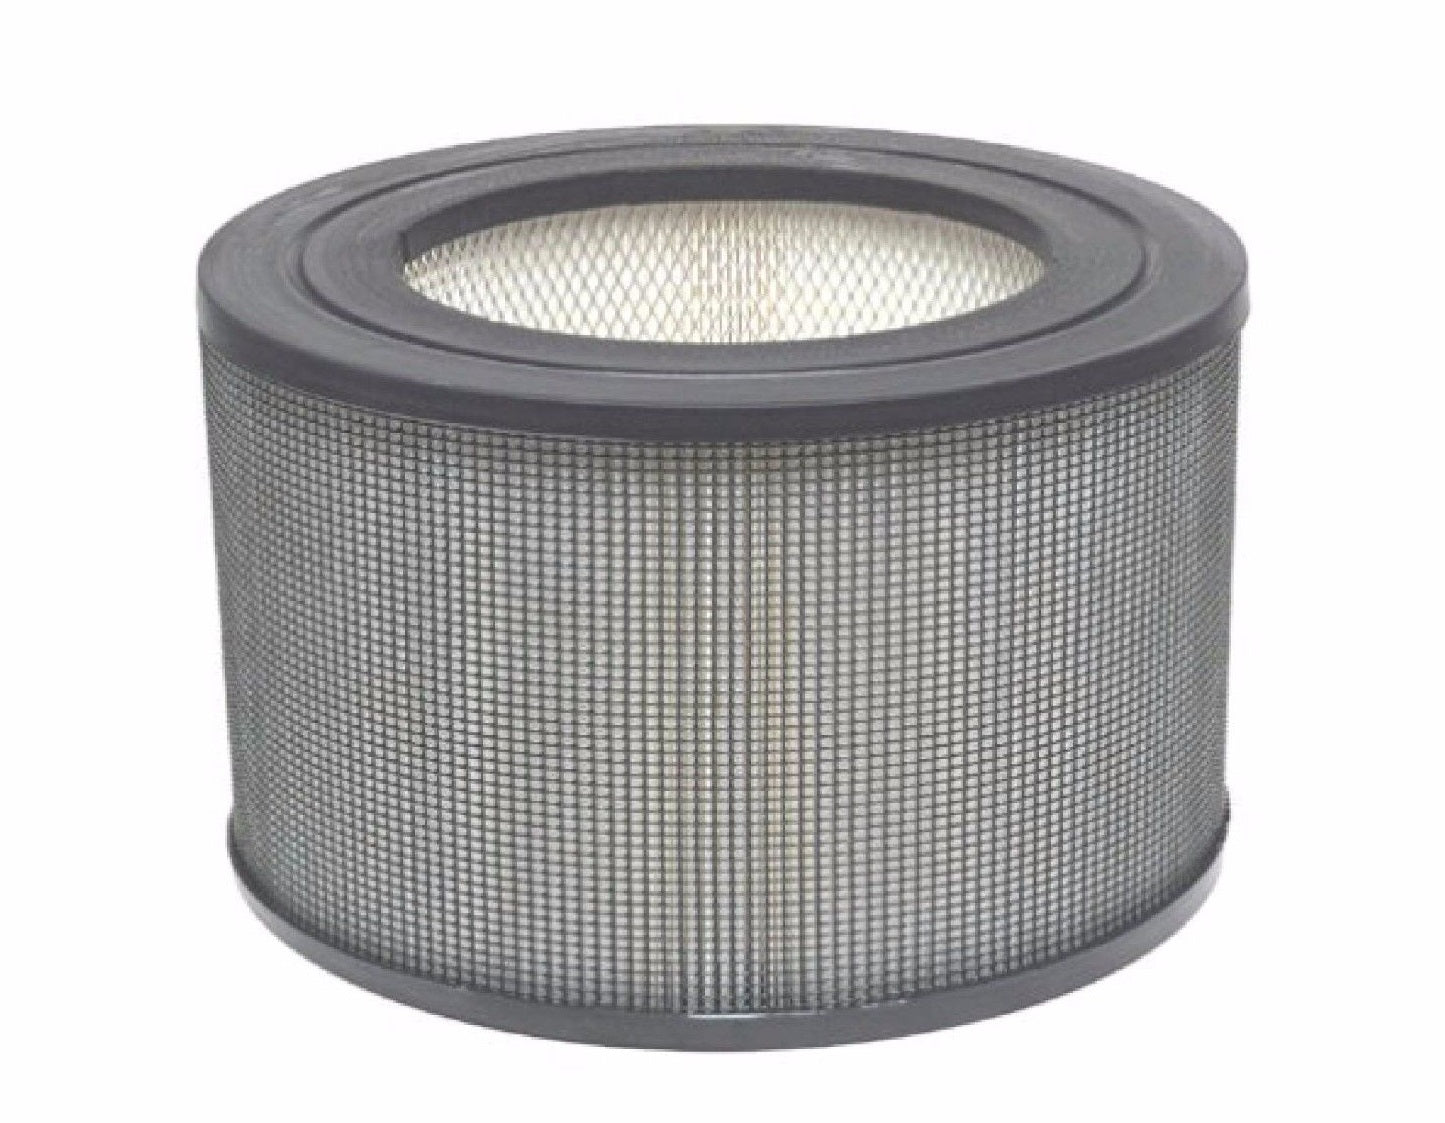 LifeSupplyUSA 3 Pack Replacement HEPA Filters Fit Honeywell 24000 / 24500 Air Cleaner